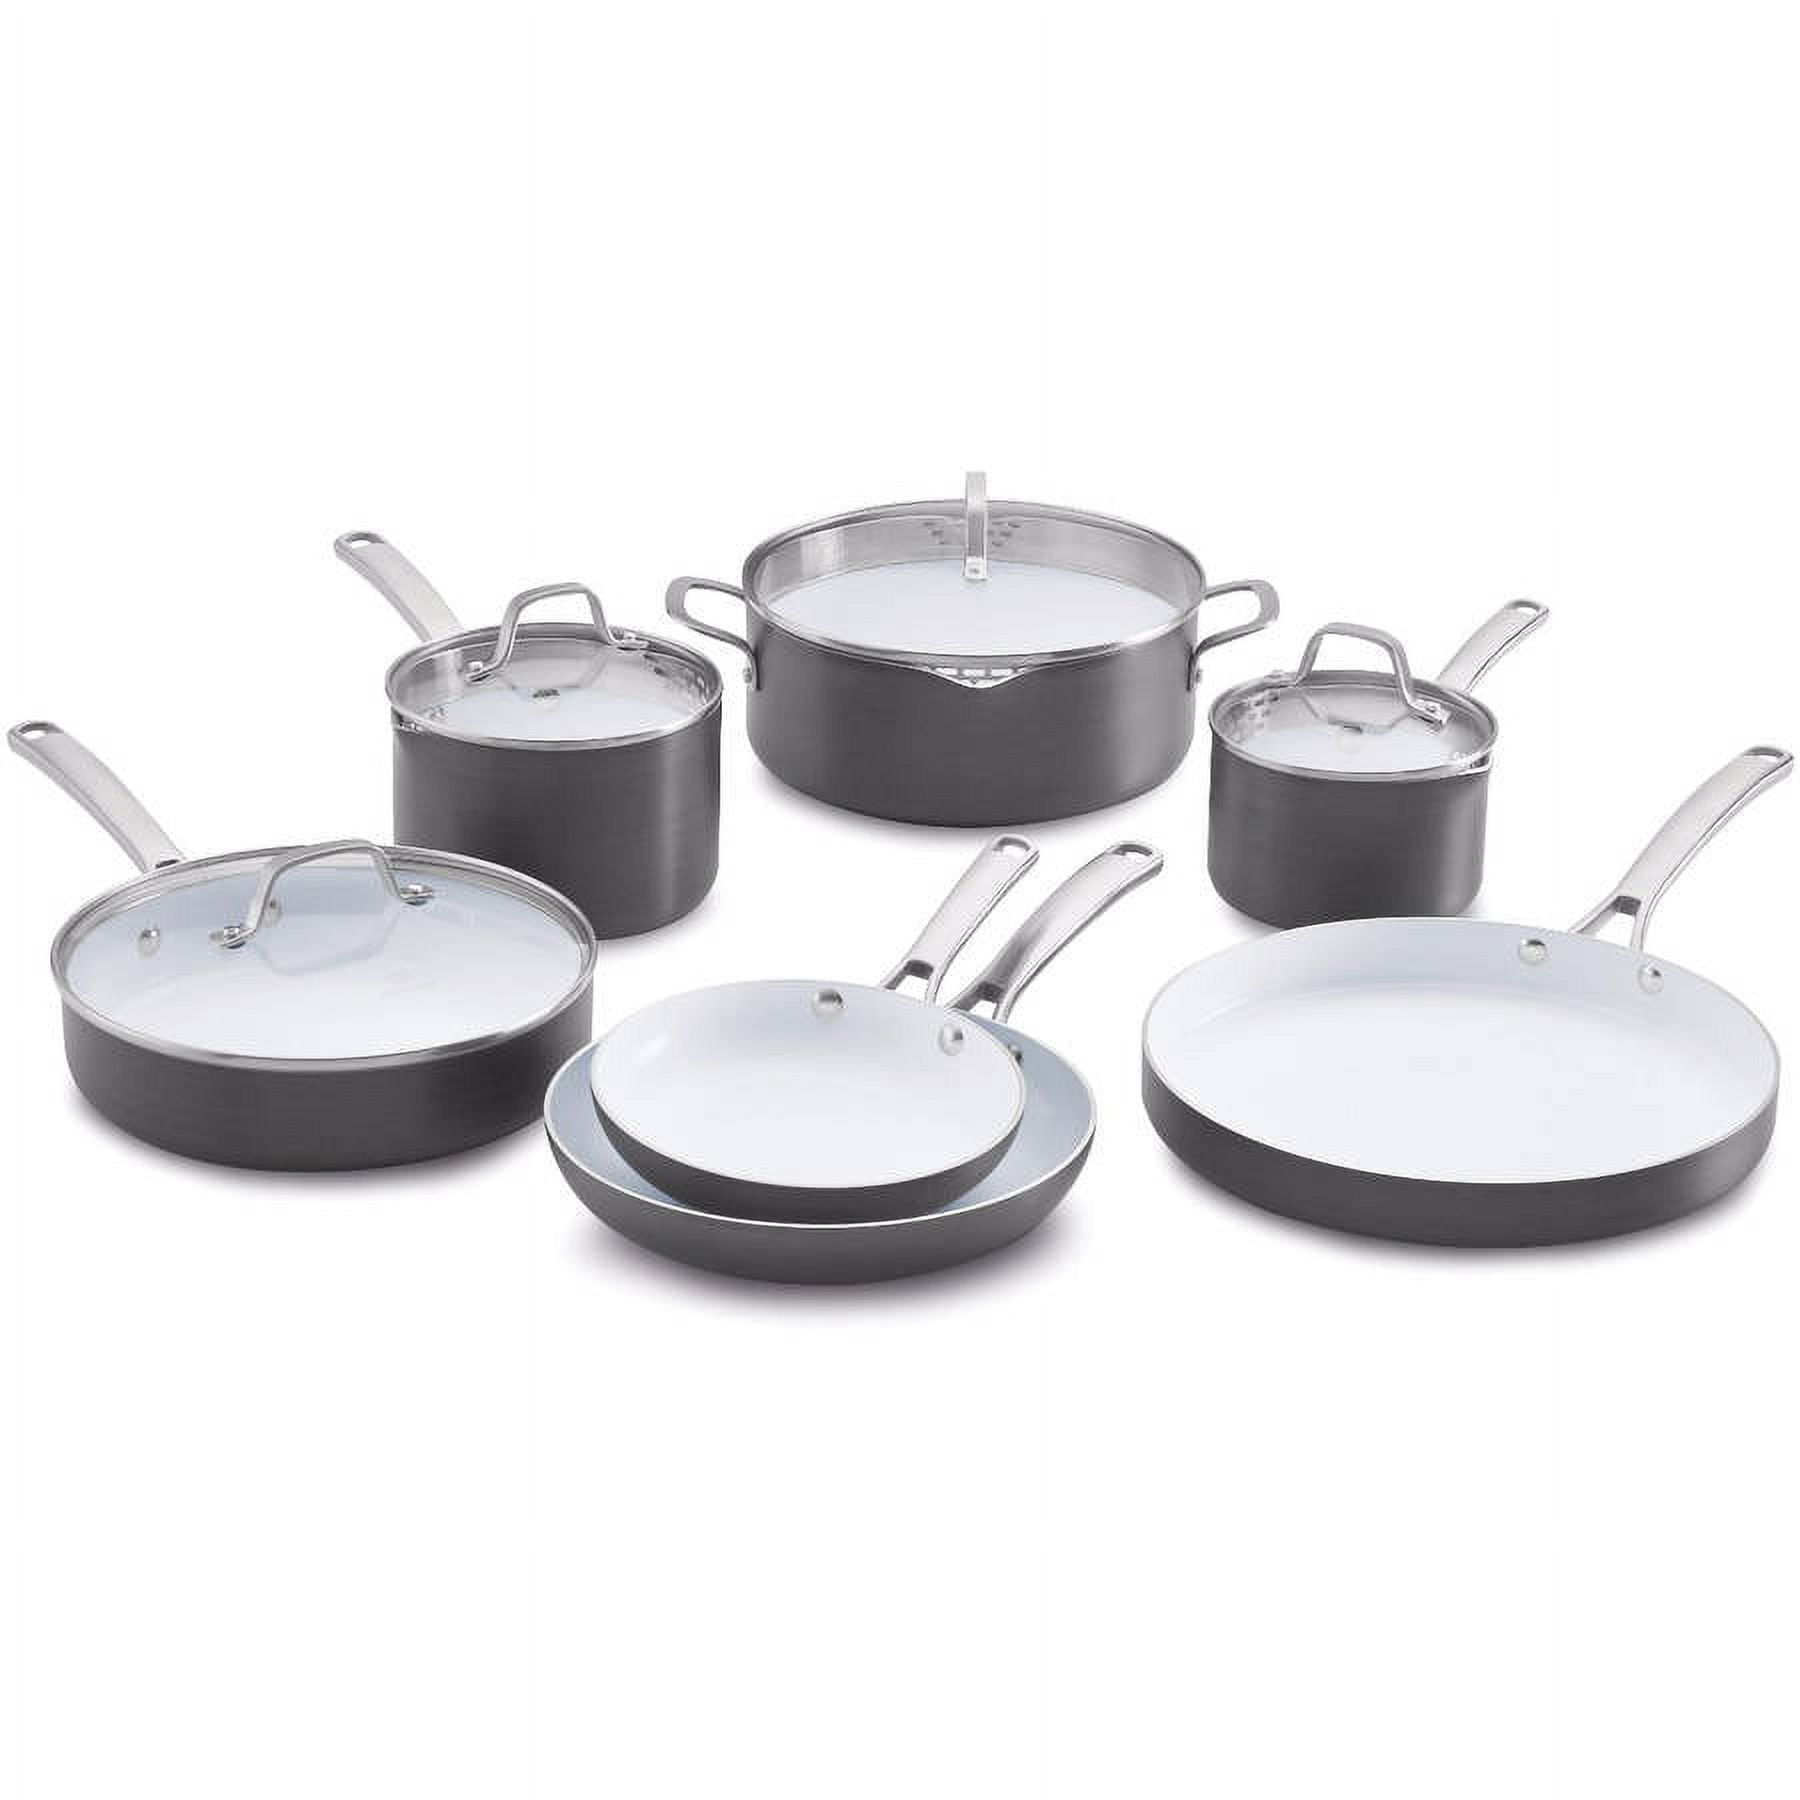  Calphalon 11-Piece Pots and Pans Set, Oil-Infused Ceramic  Cookware, Dark Grey & Nonstick Bakeware Set, 10-Piece Set Includes Baking  Sheet, Cookie Sheet, Cake Pans, Muffin Pan, and More, Silver : Everything